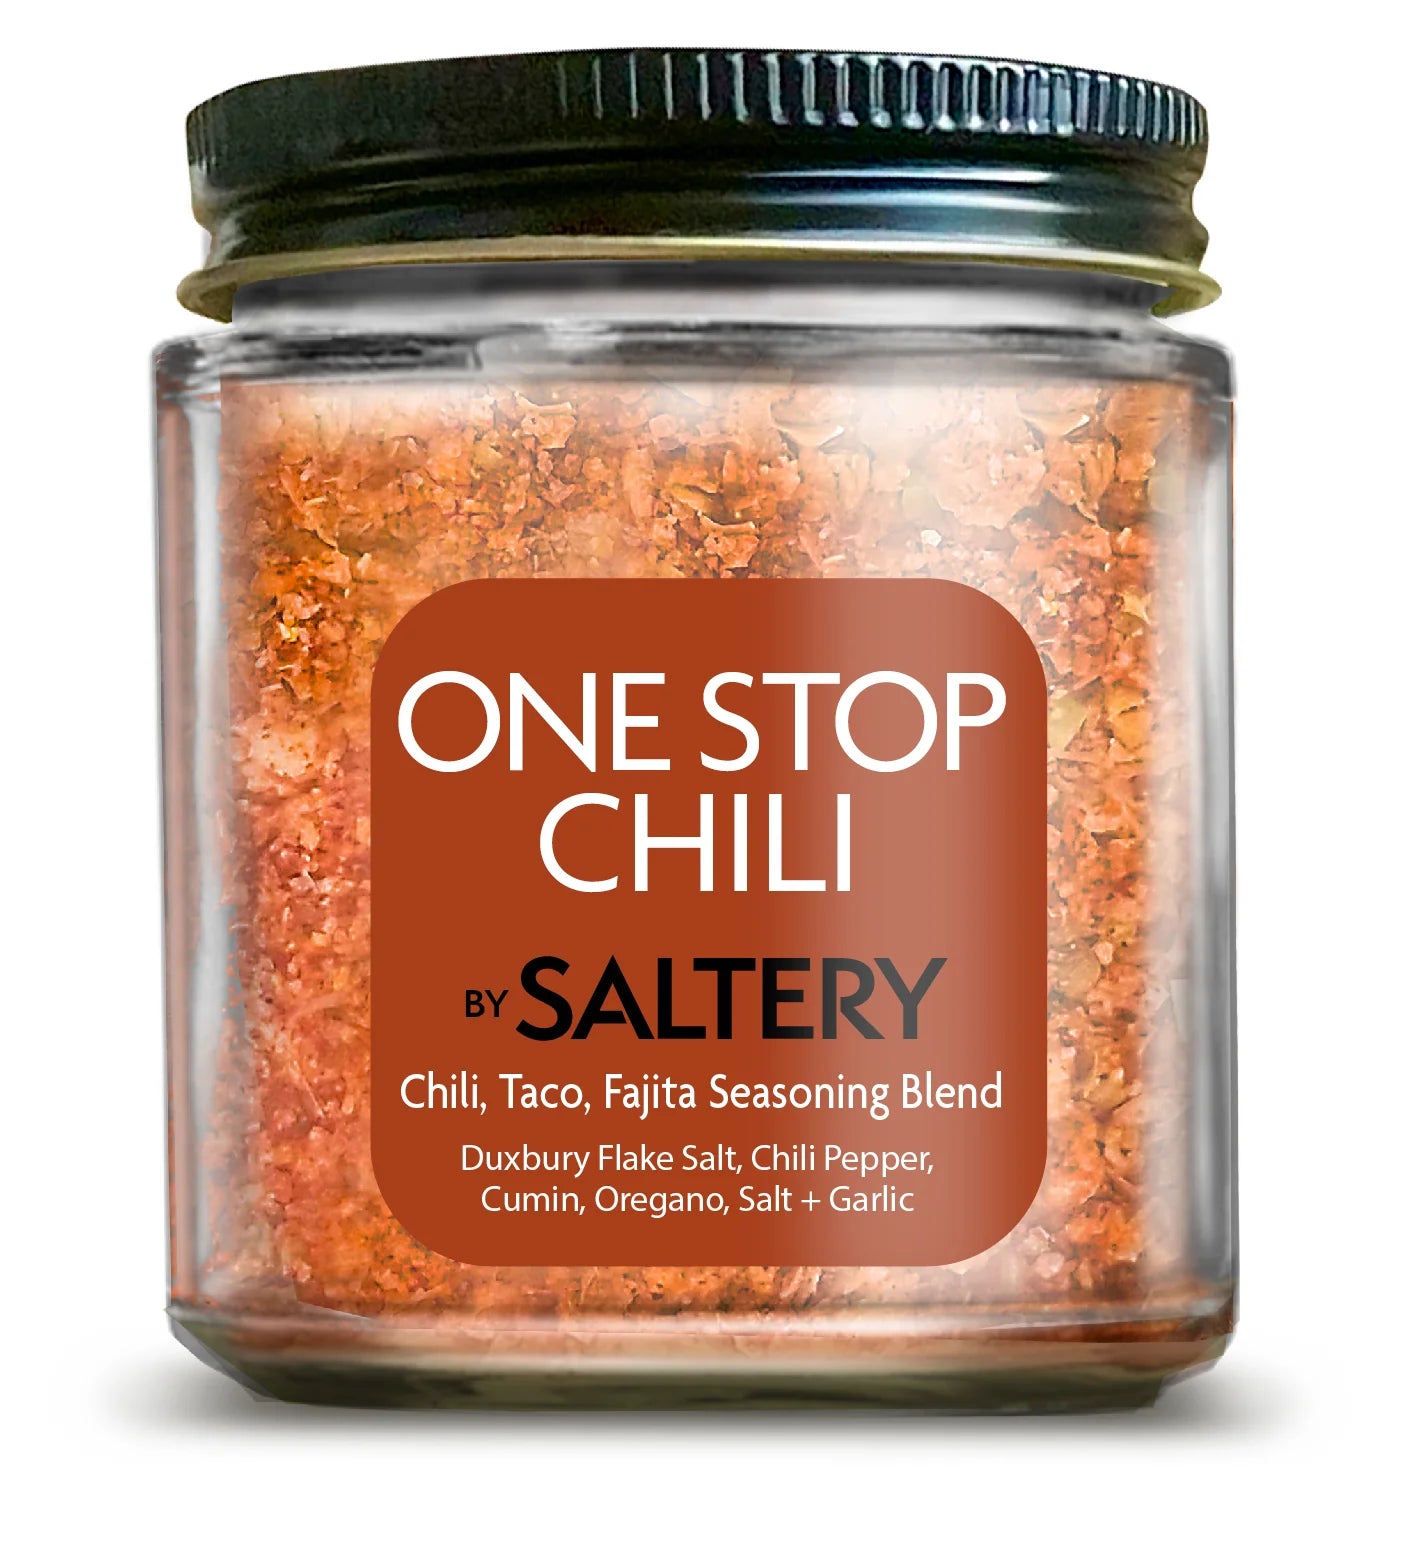 One Stop Chill Saltery